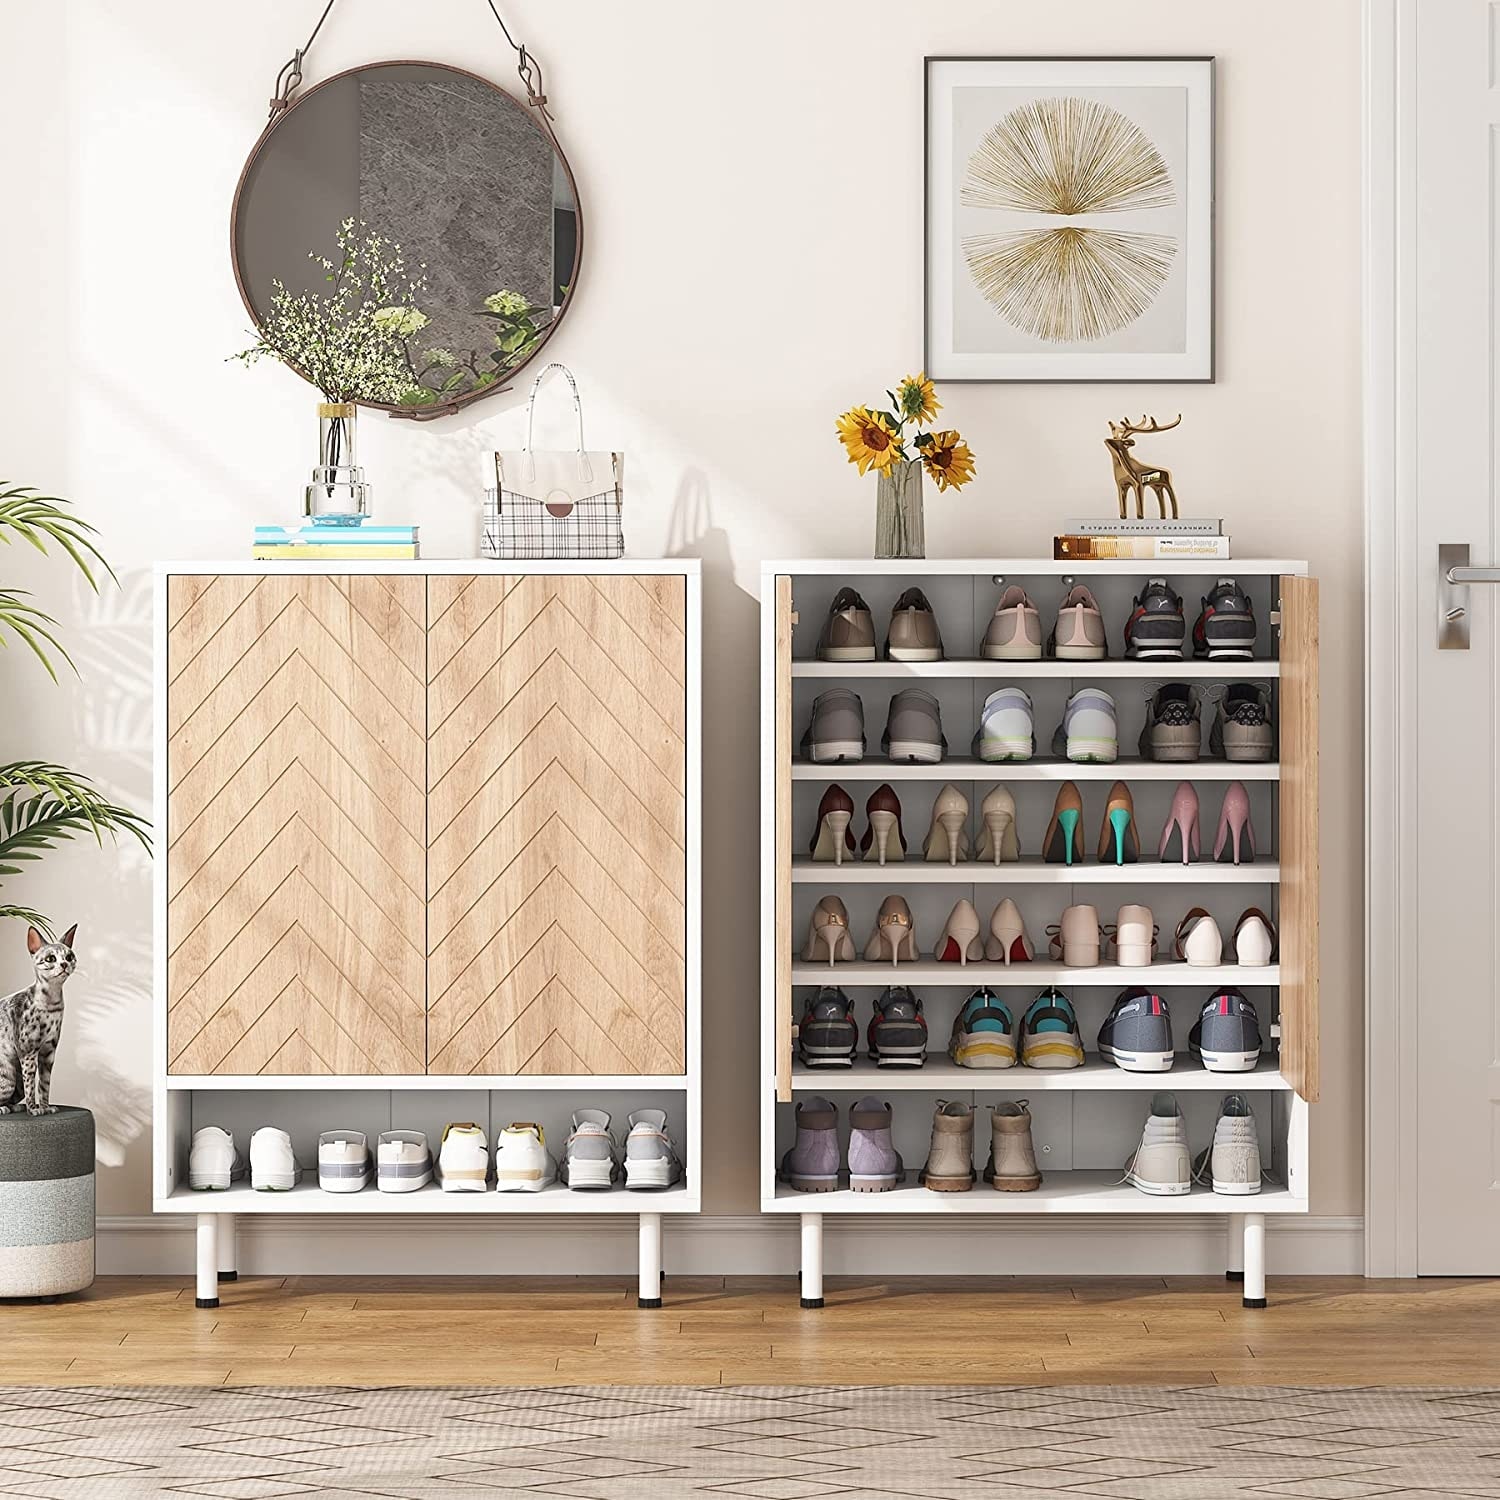 https://ak1.ostkcdn.com/images/products/is/images/direct/1a25e86306b5a883a971e38e8147cde61bede89f/Entryway-Shoe-Storage-Cabinet-Shoe-Rack-Organizer-Cabinet-with-Door.jpg